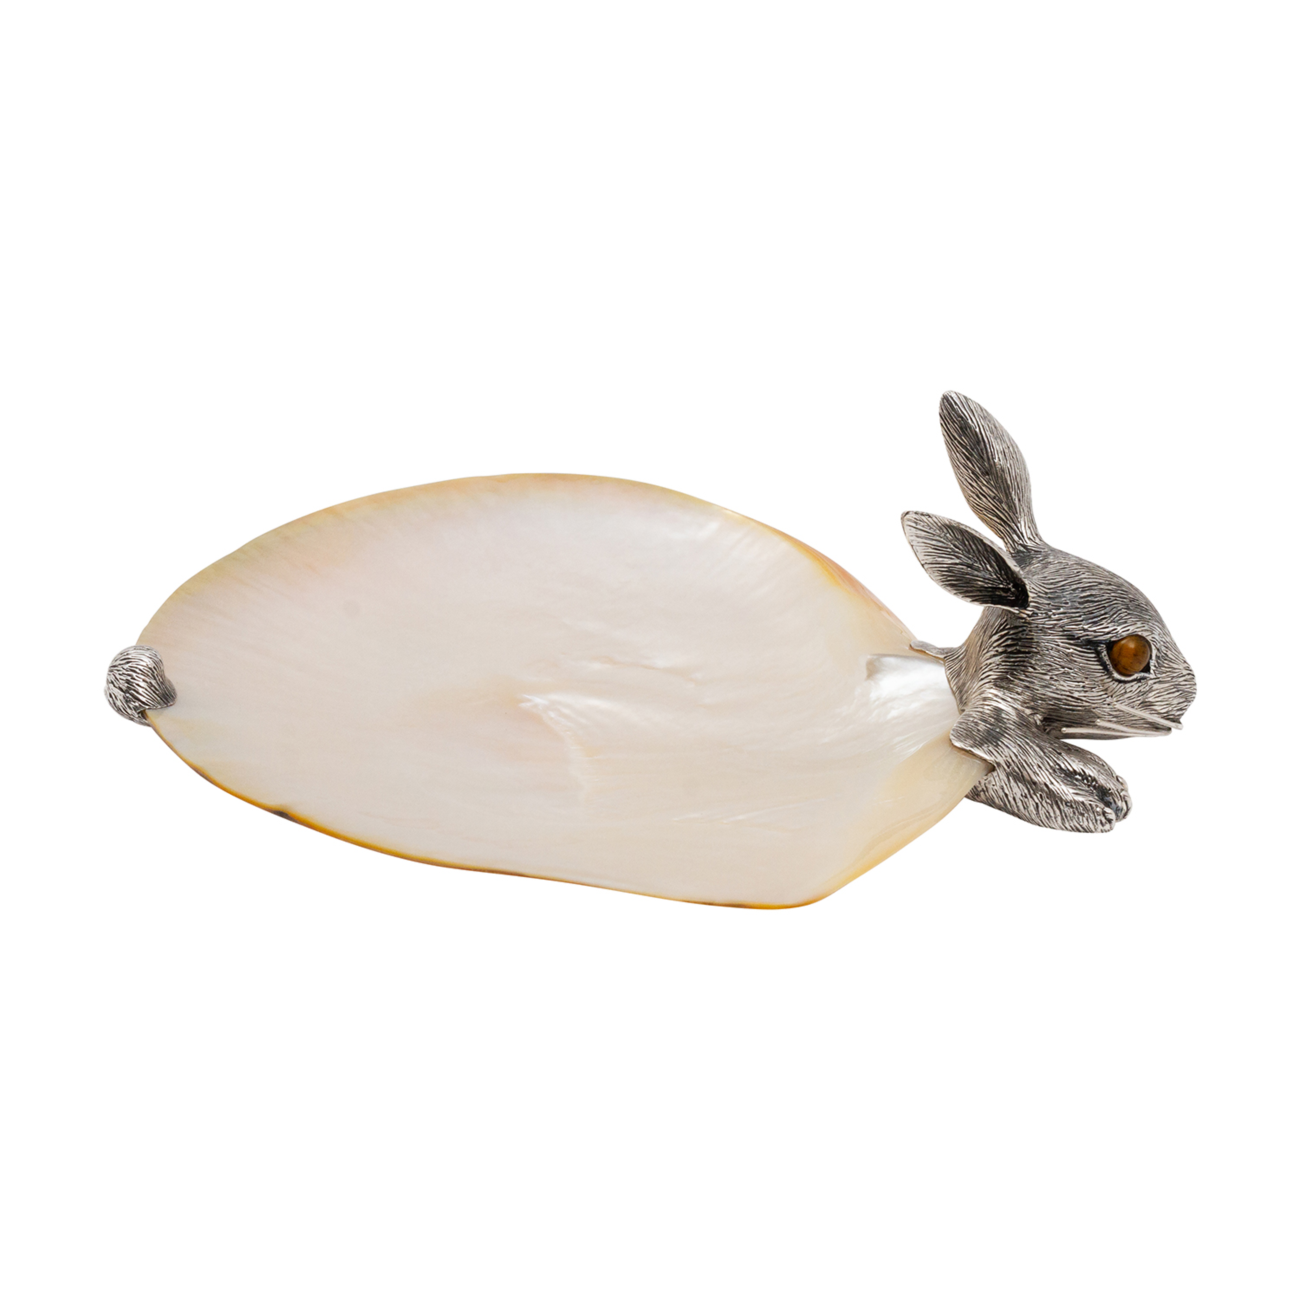 Mother of Pearl Canape Plate with Silver Grazing Rabbit